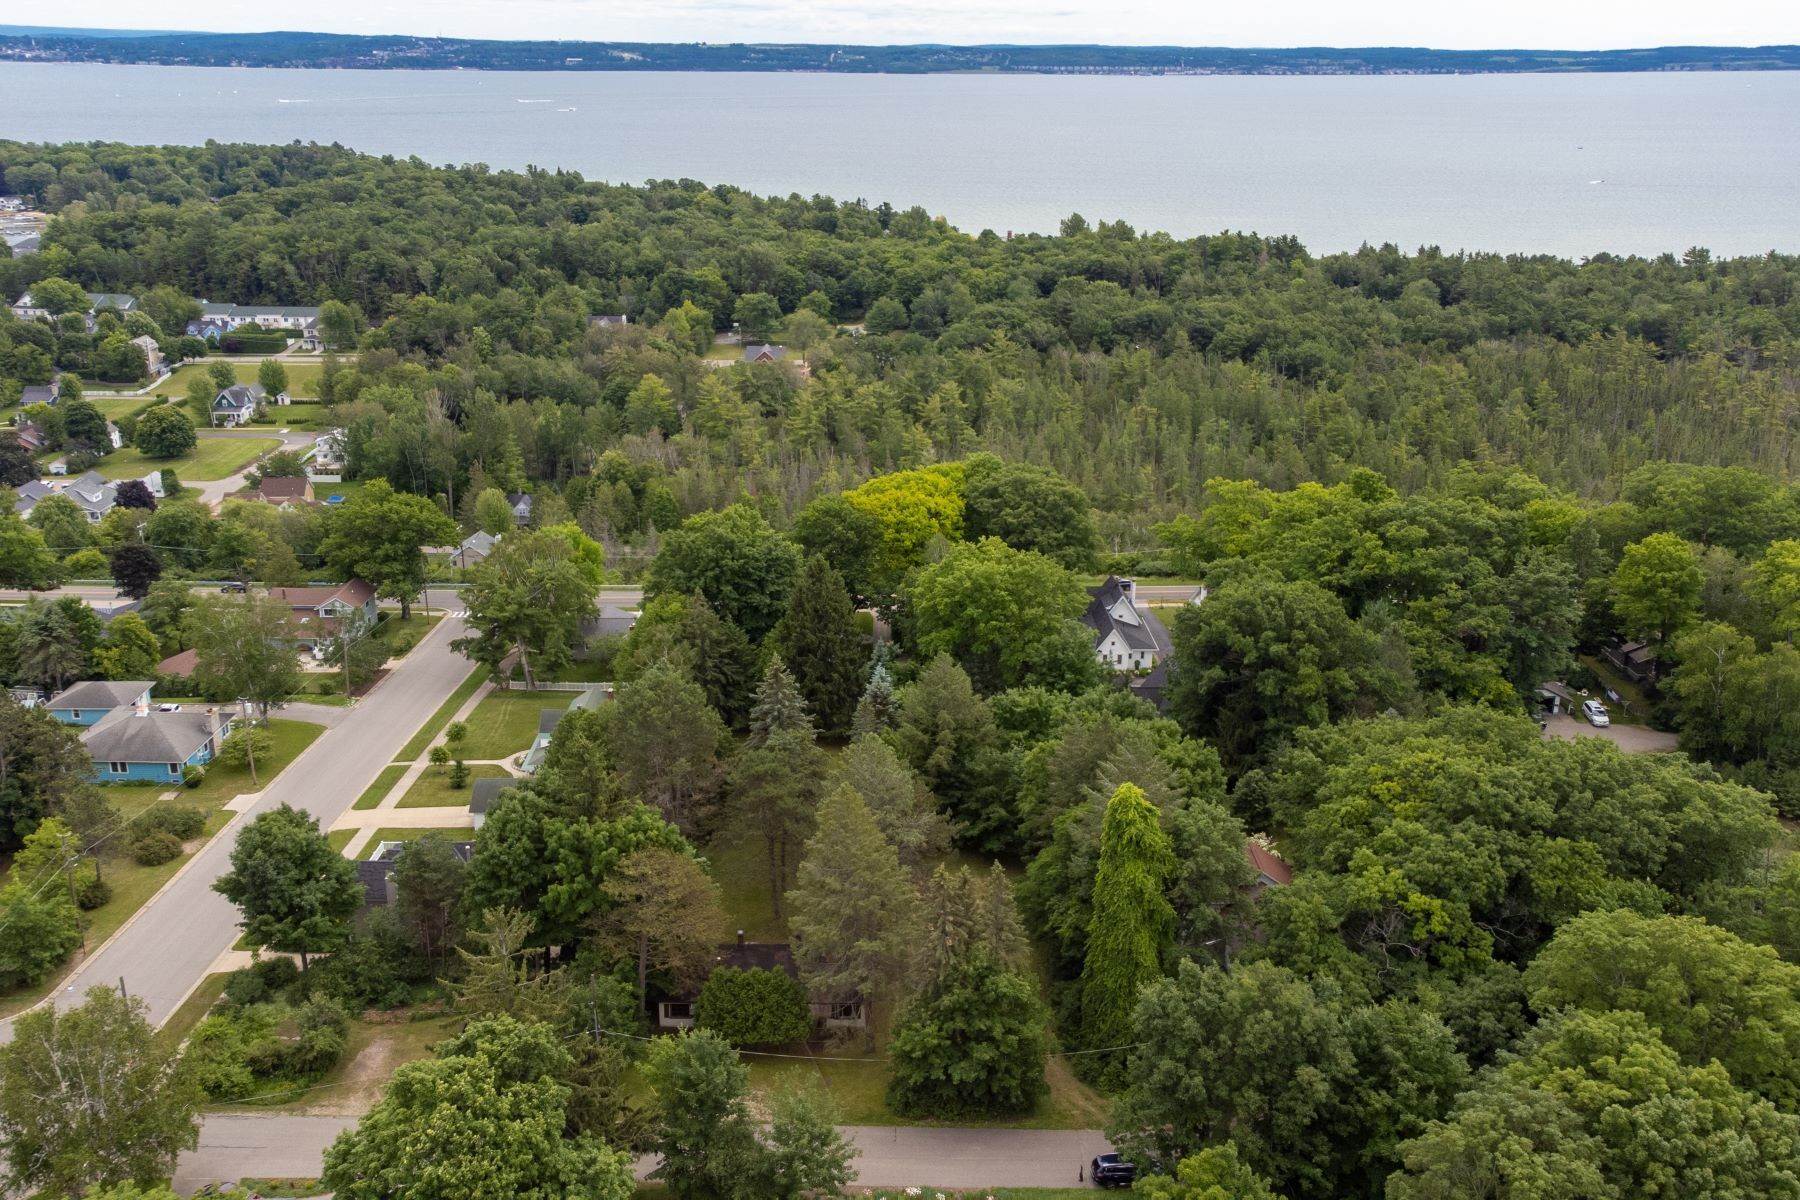 3. Land for Sale at In town building site with Lake Michigan views 443 West Summit Street Harbor Springs, Michigan 49740 United States